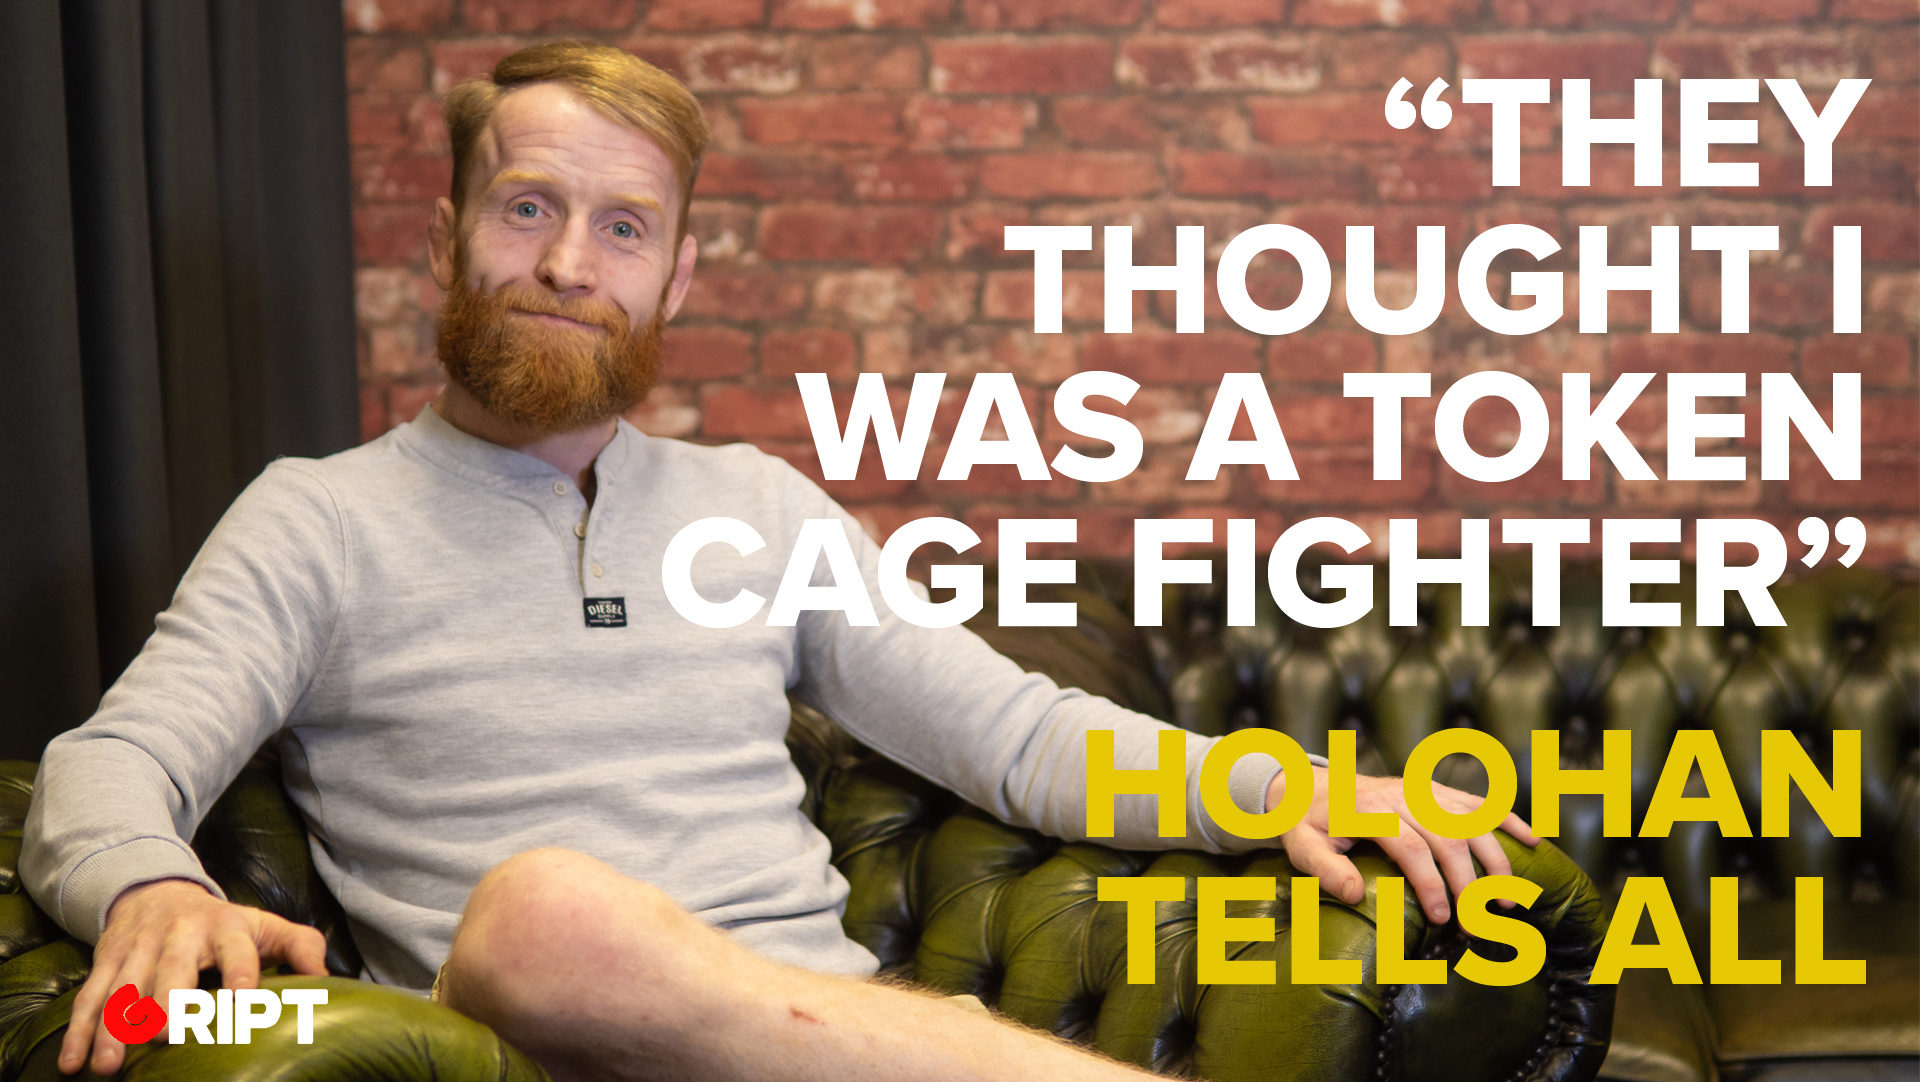 “They thought I was a Token Cage Fighter”: Holohan tells all